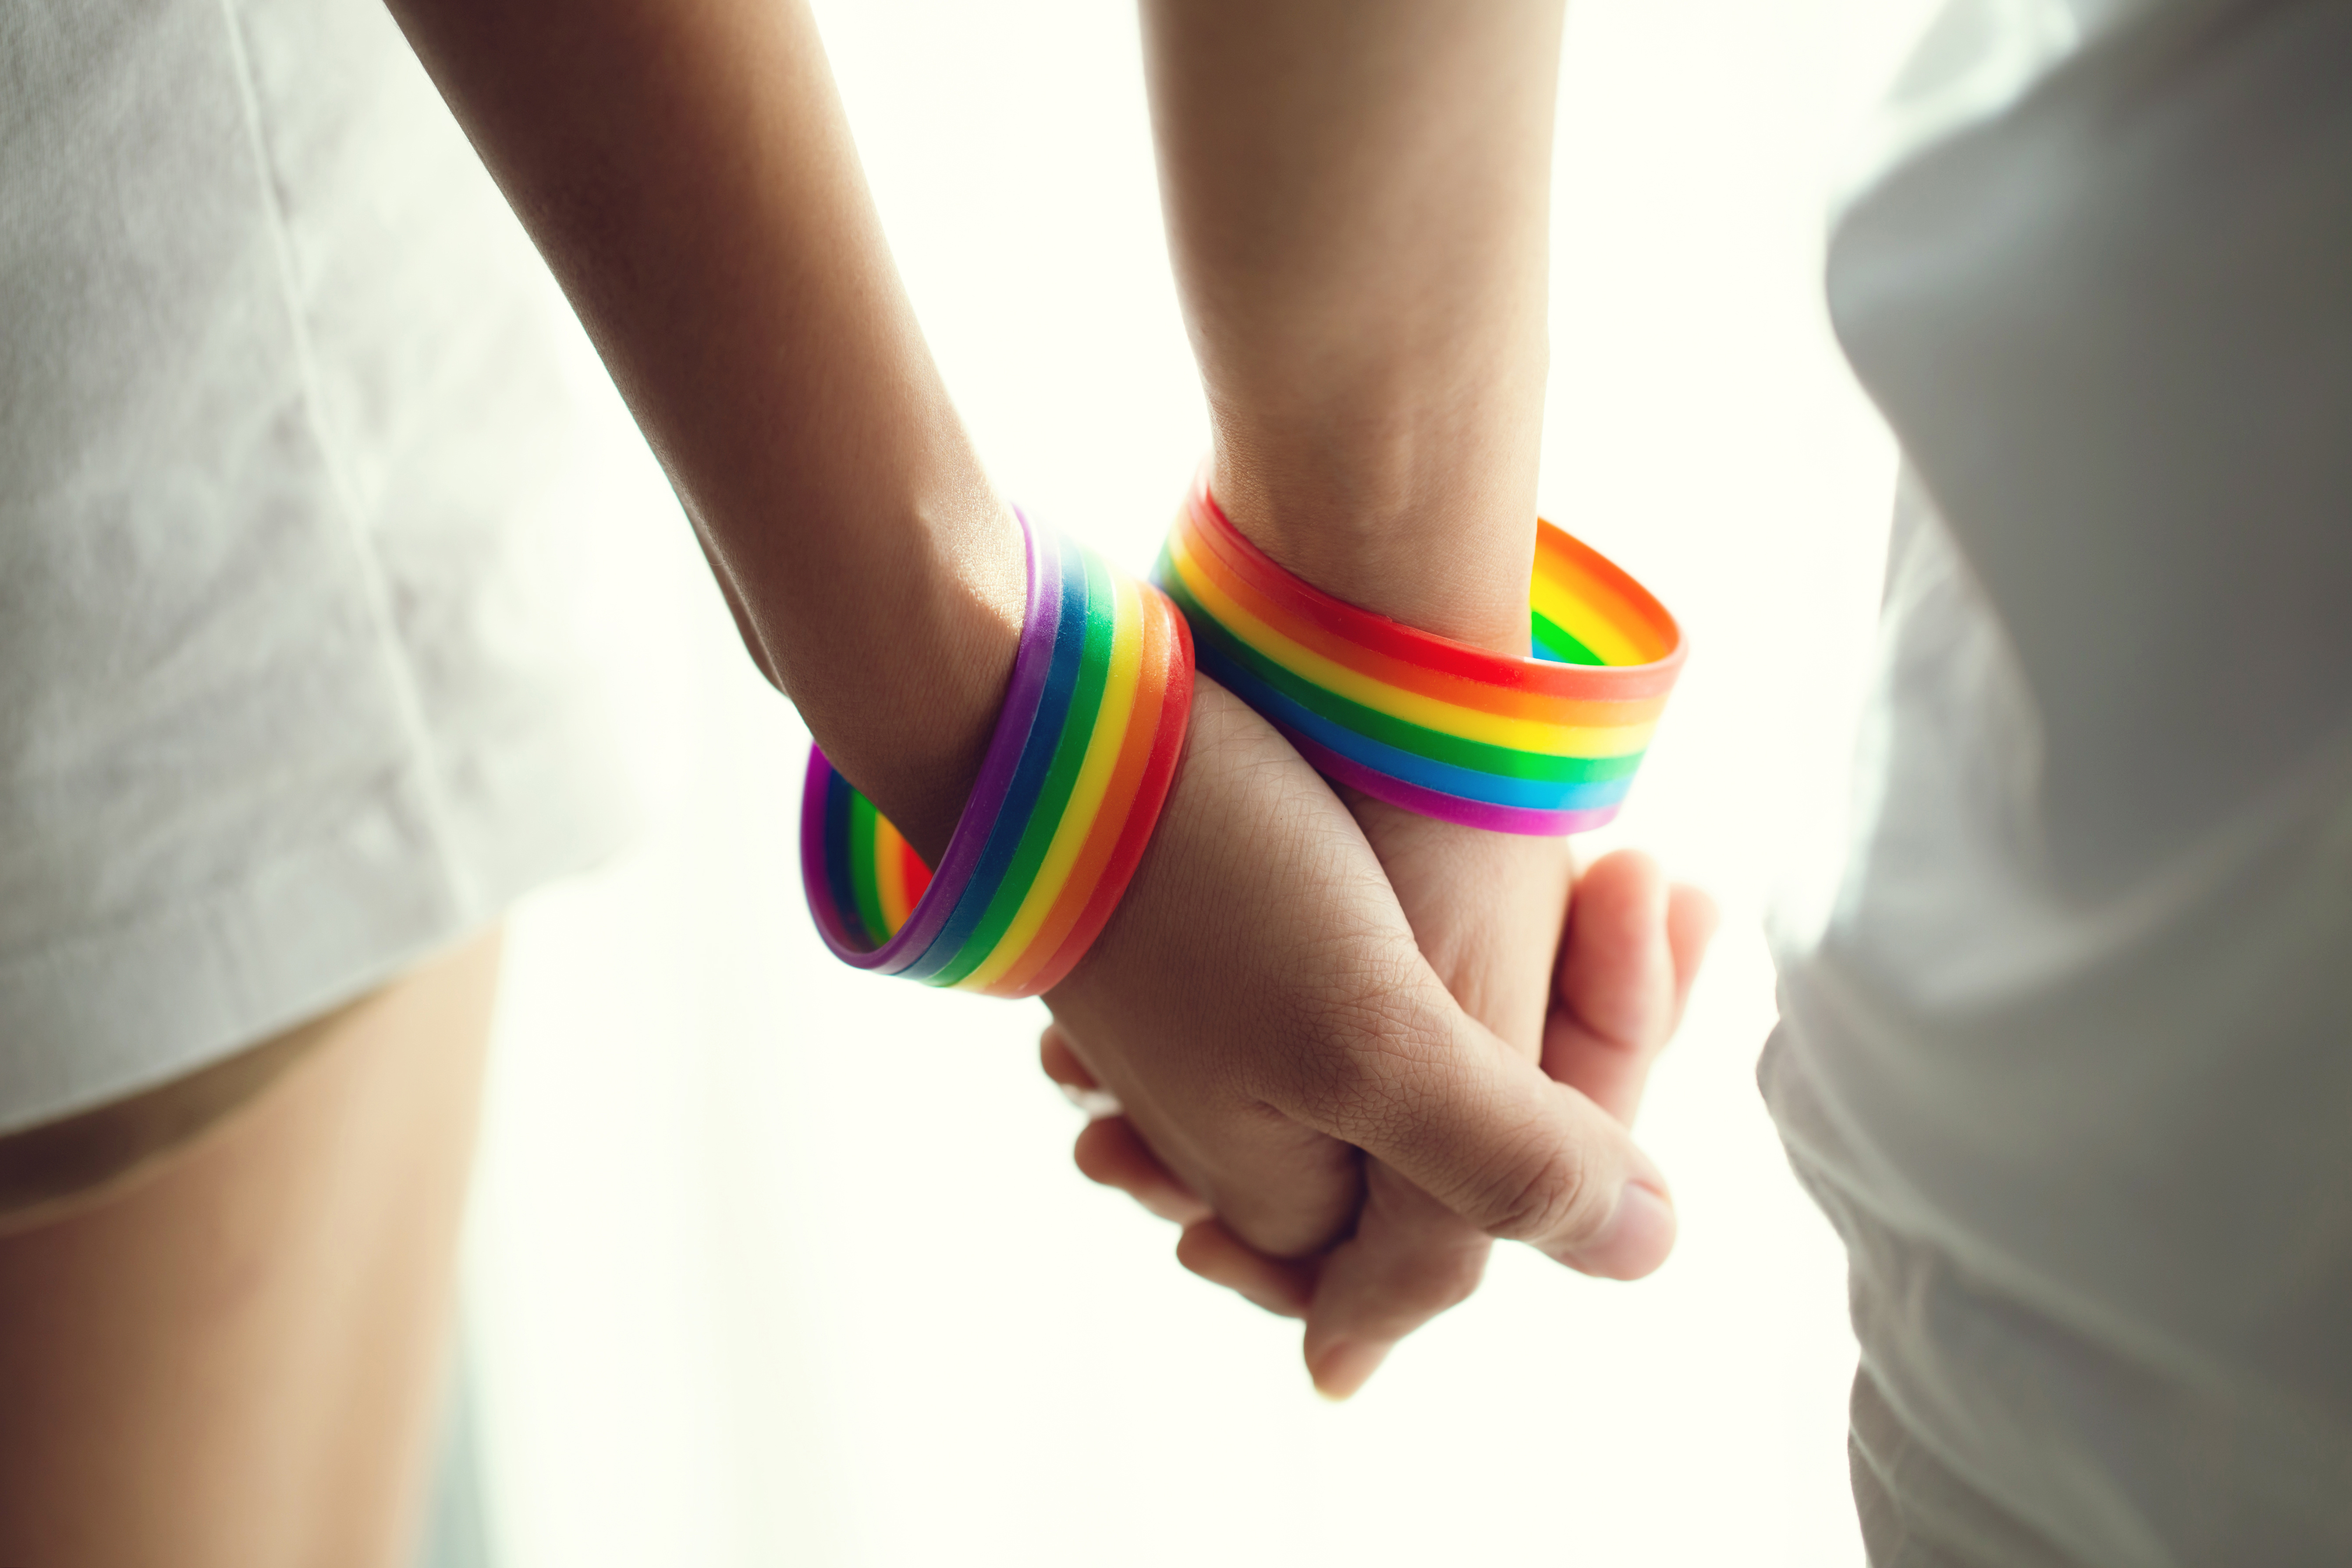 holding hands with rainbow bracelets